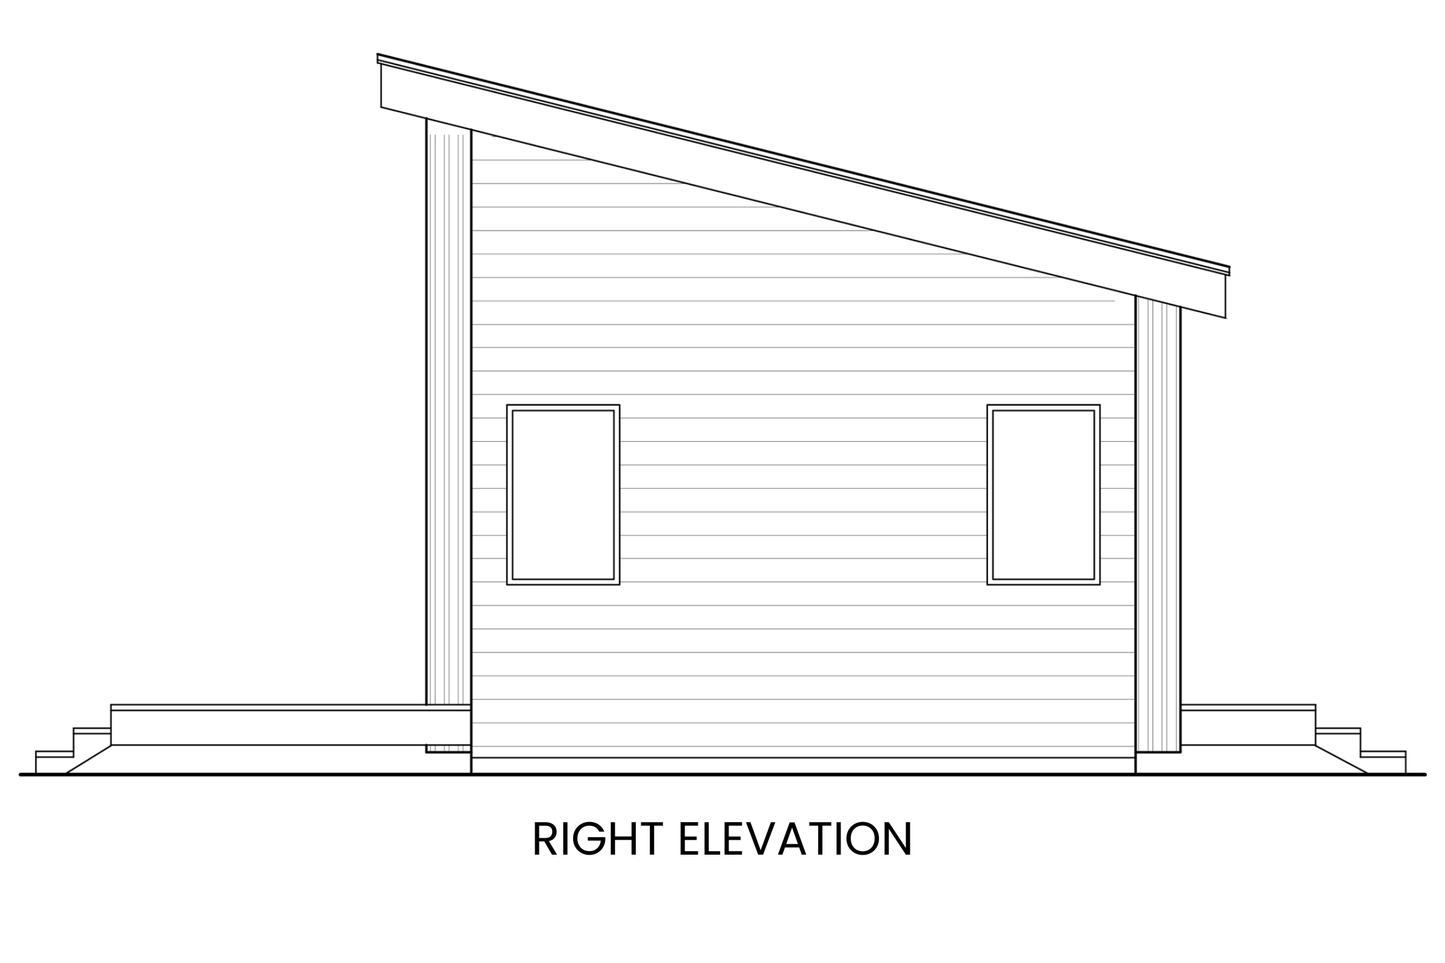 Contemporary-Tiny-Home-Plan-Right-Elevation-Rocky-Mountain-Plan-Company-Snapdragon